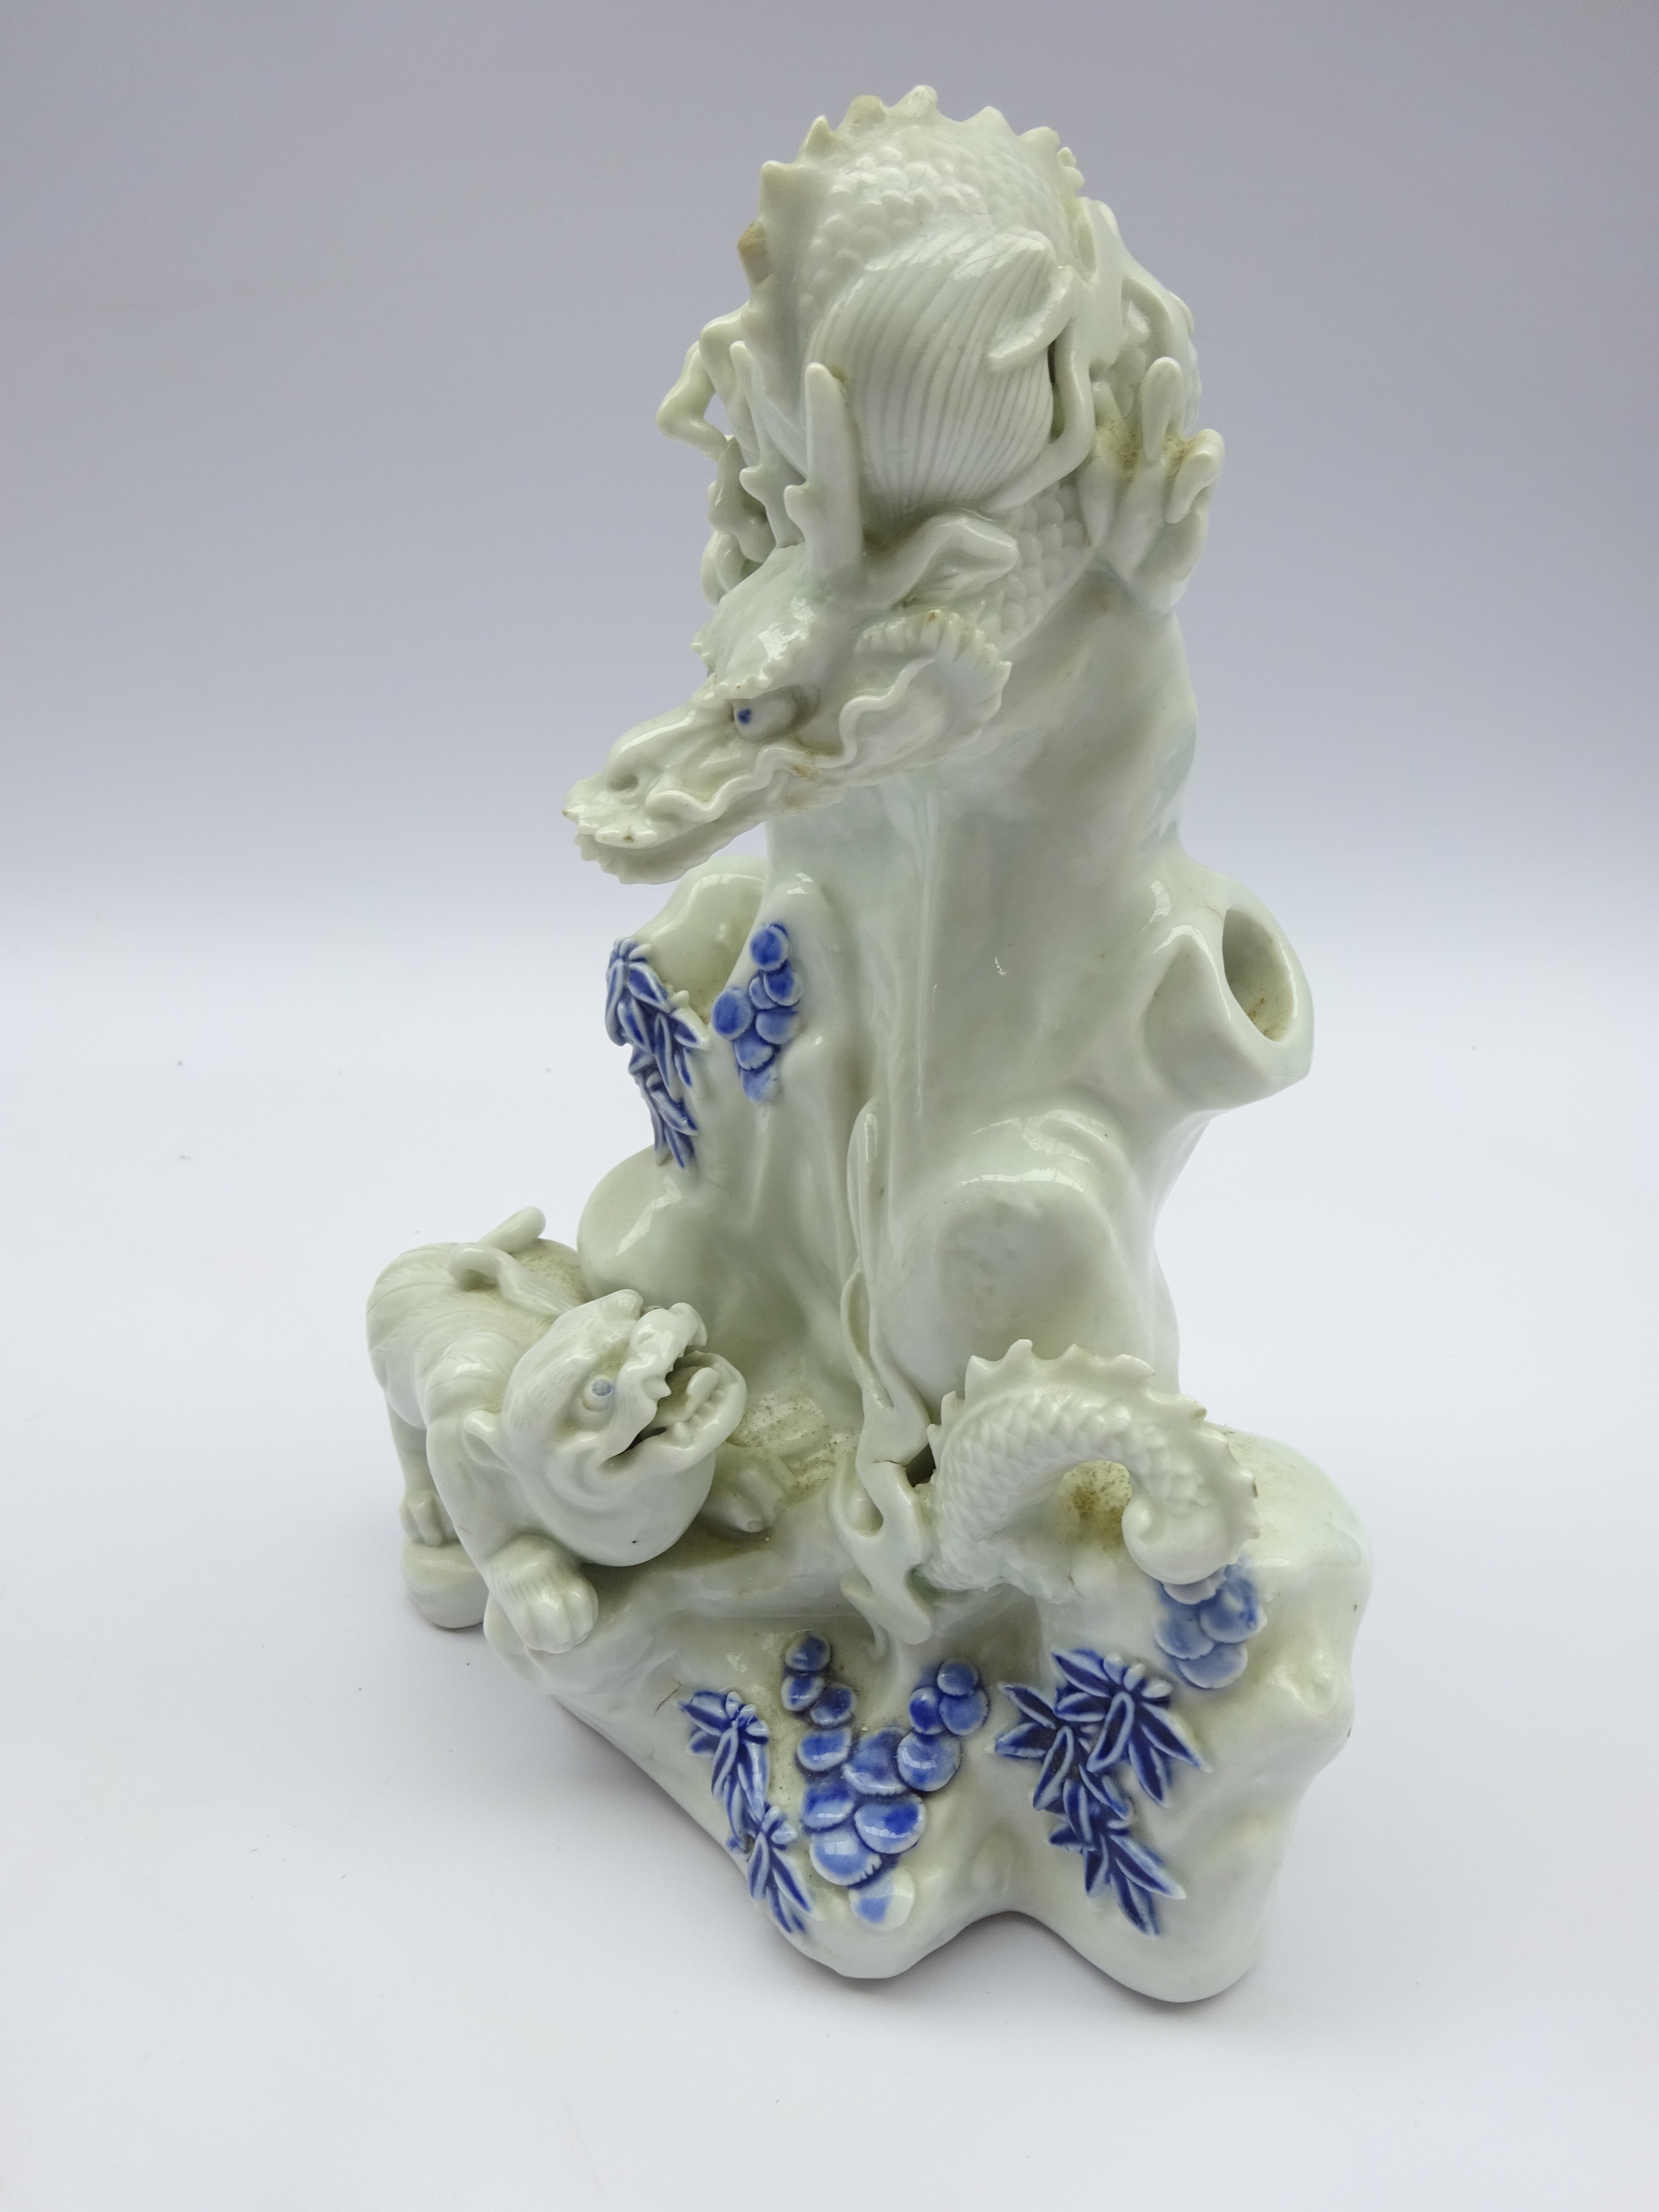 Oriental Blanc De Chine ornament in the form of a Dragon, H22cm, modern chinese figure, - Image 4 of 7